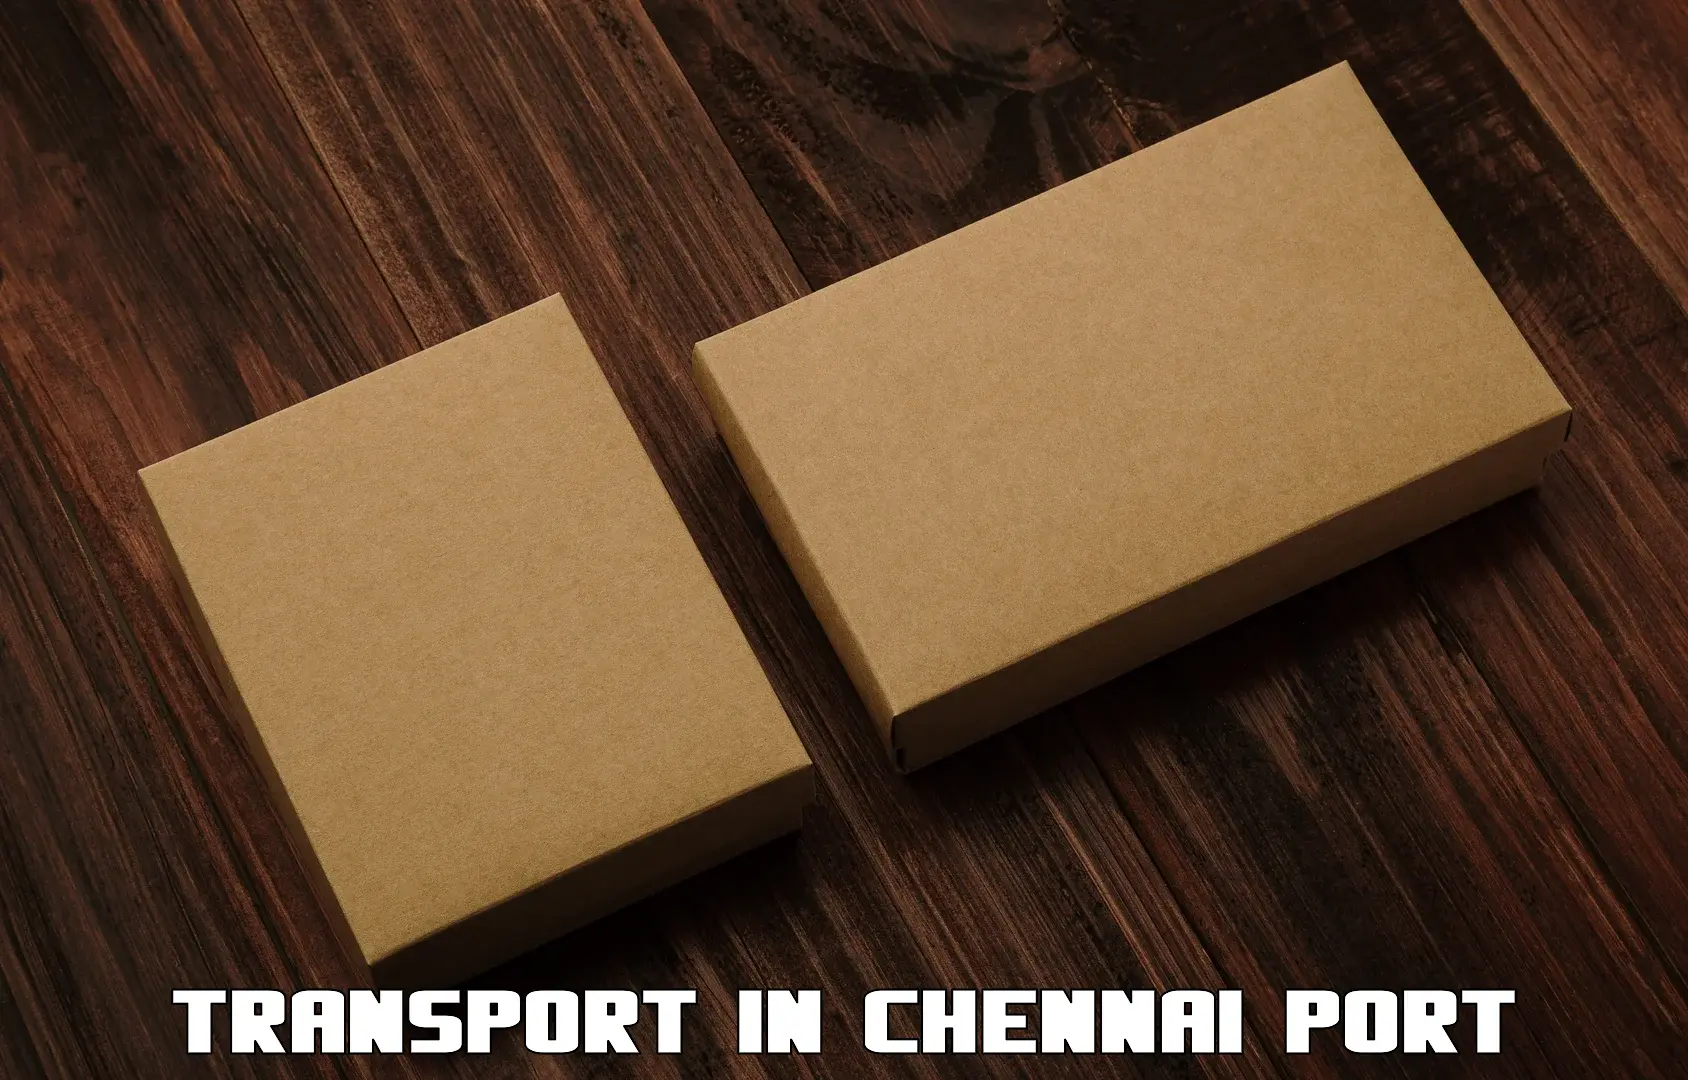 Transport shared services in Chennai Port